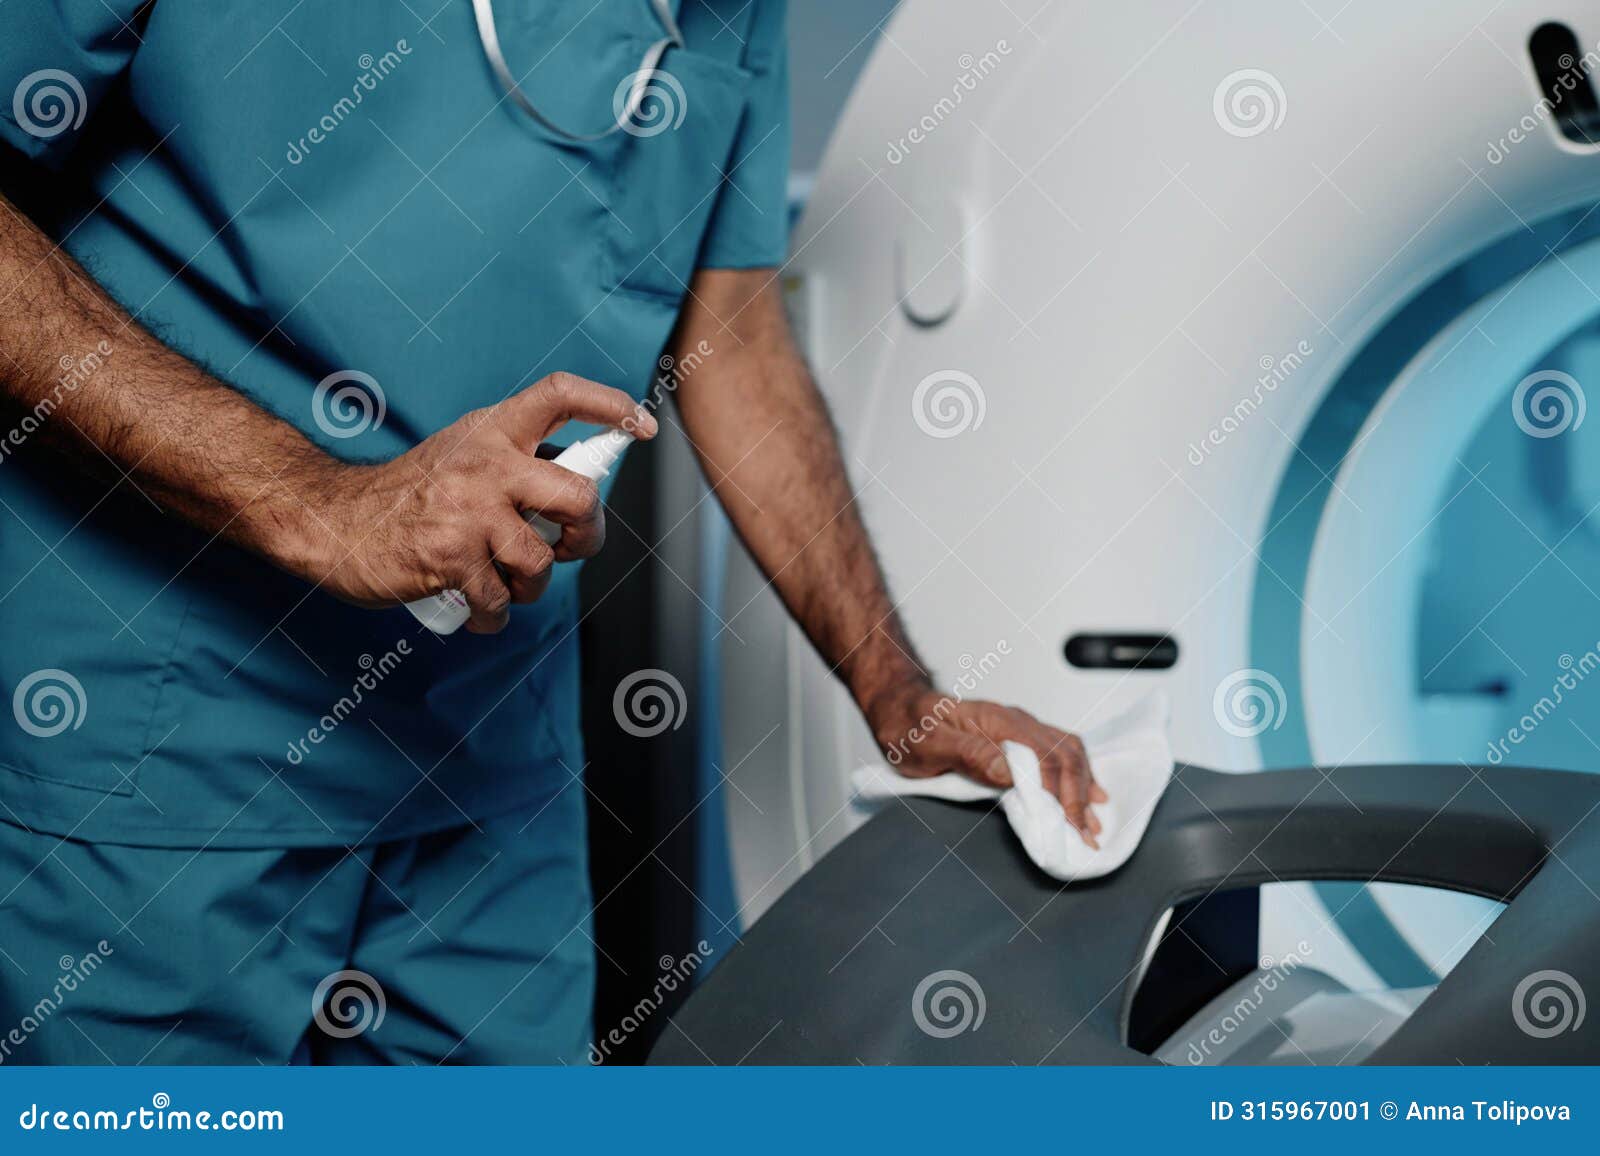 radiographer cleaning ct scanner bed